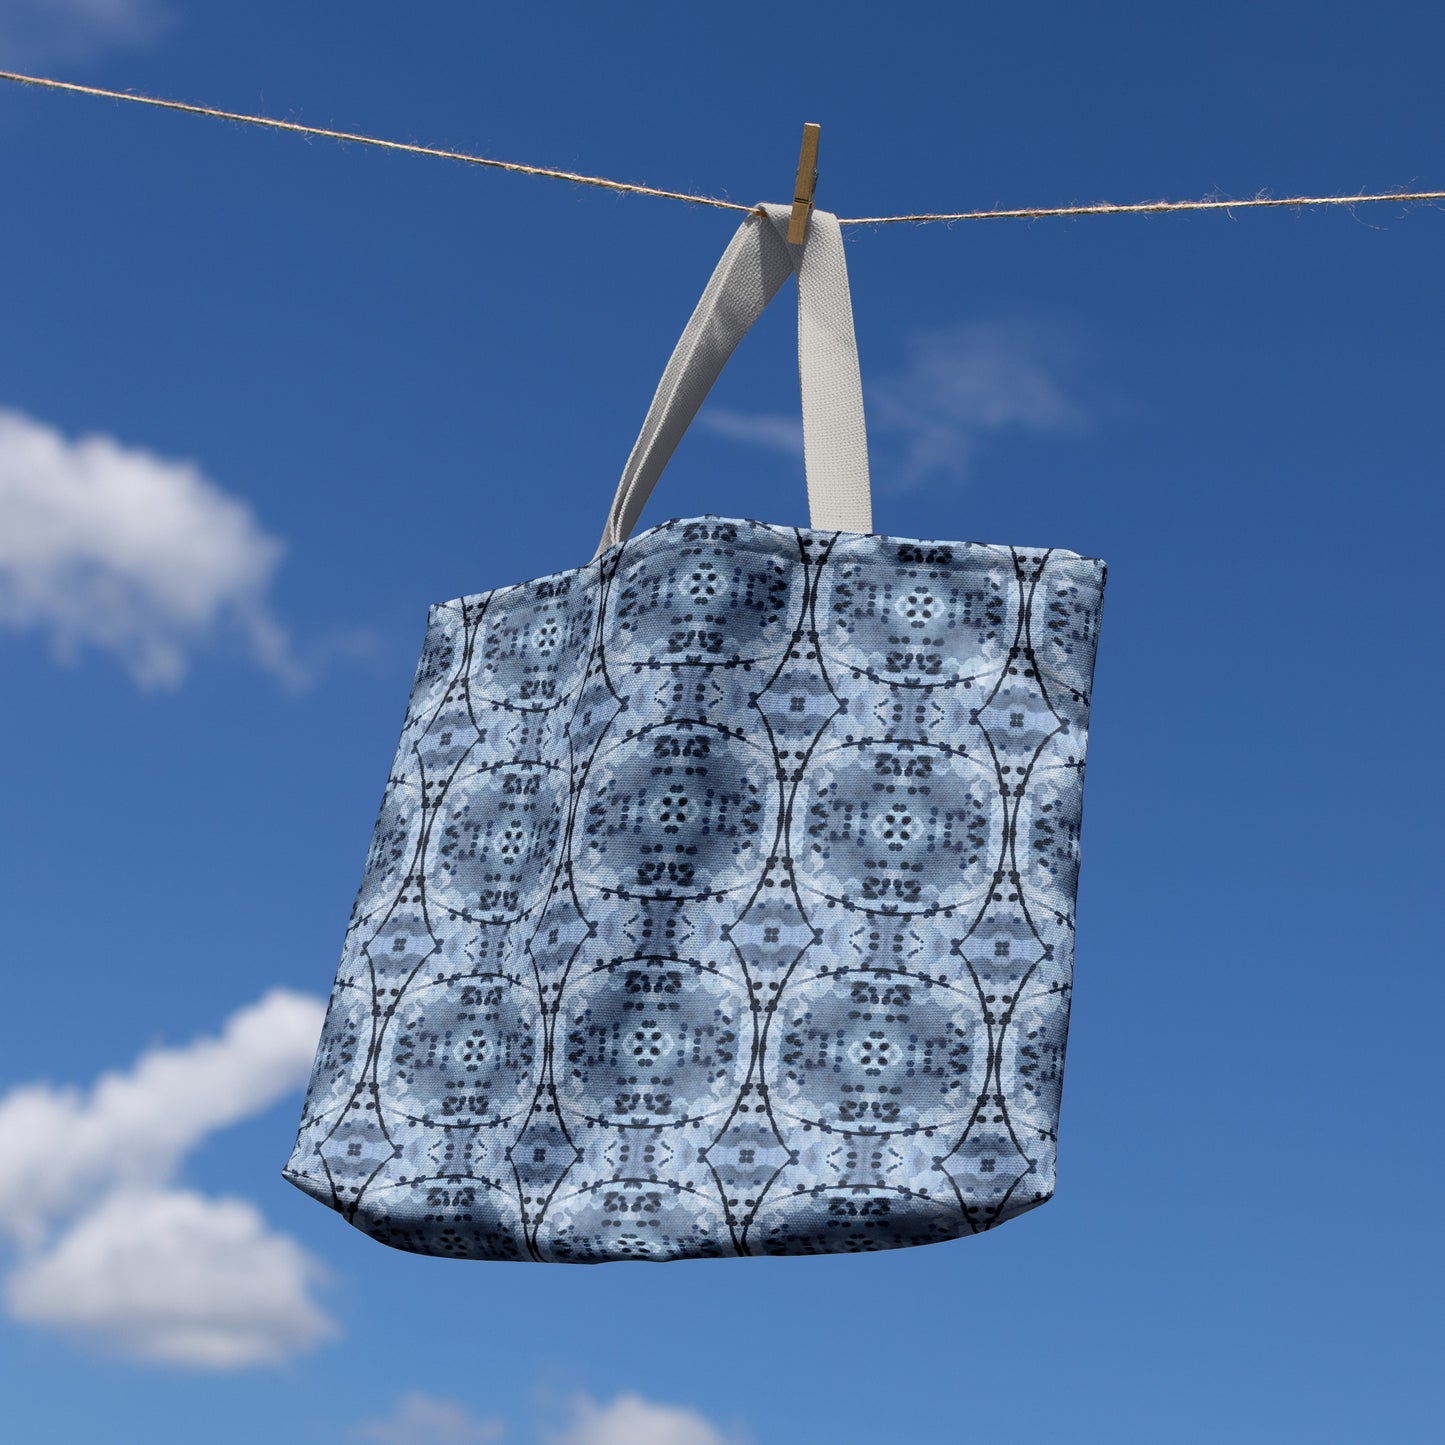 Large tote bag featuring an abstract hand-painted blue design, haniging on a clothesline in front of blue eky